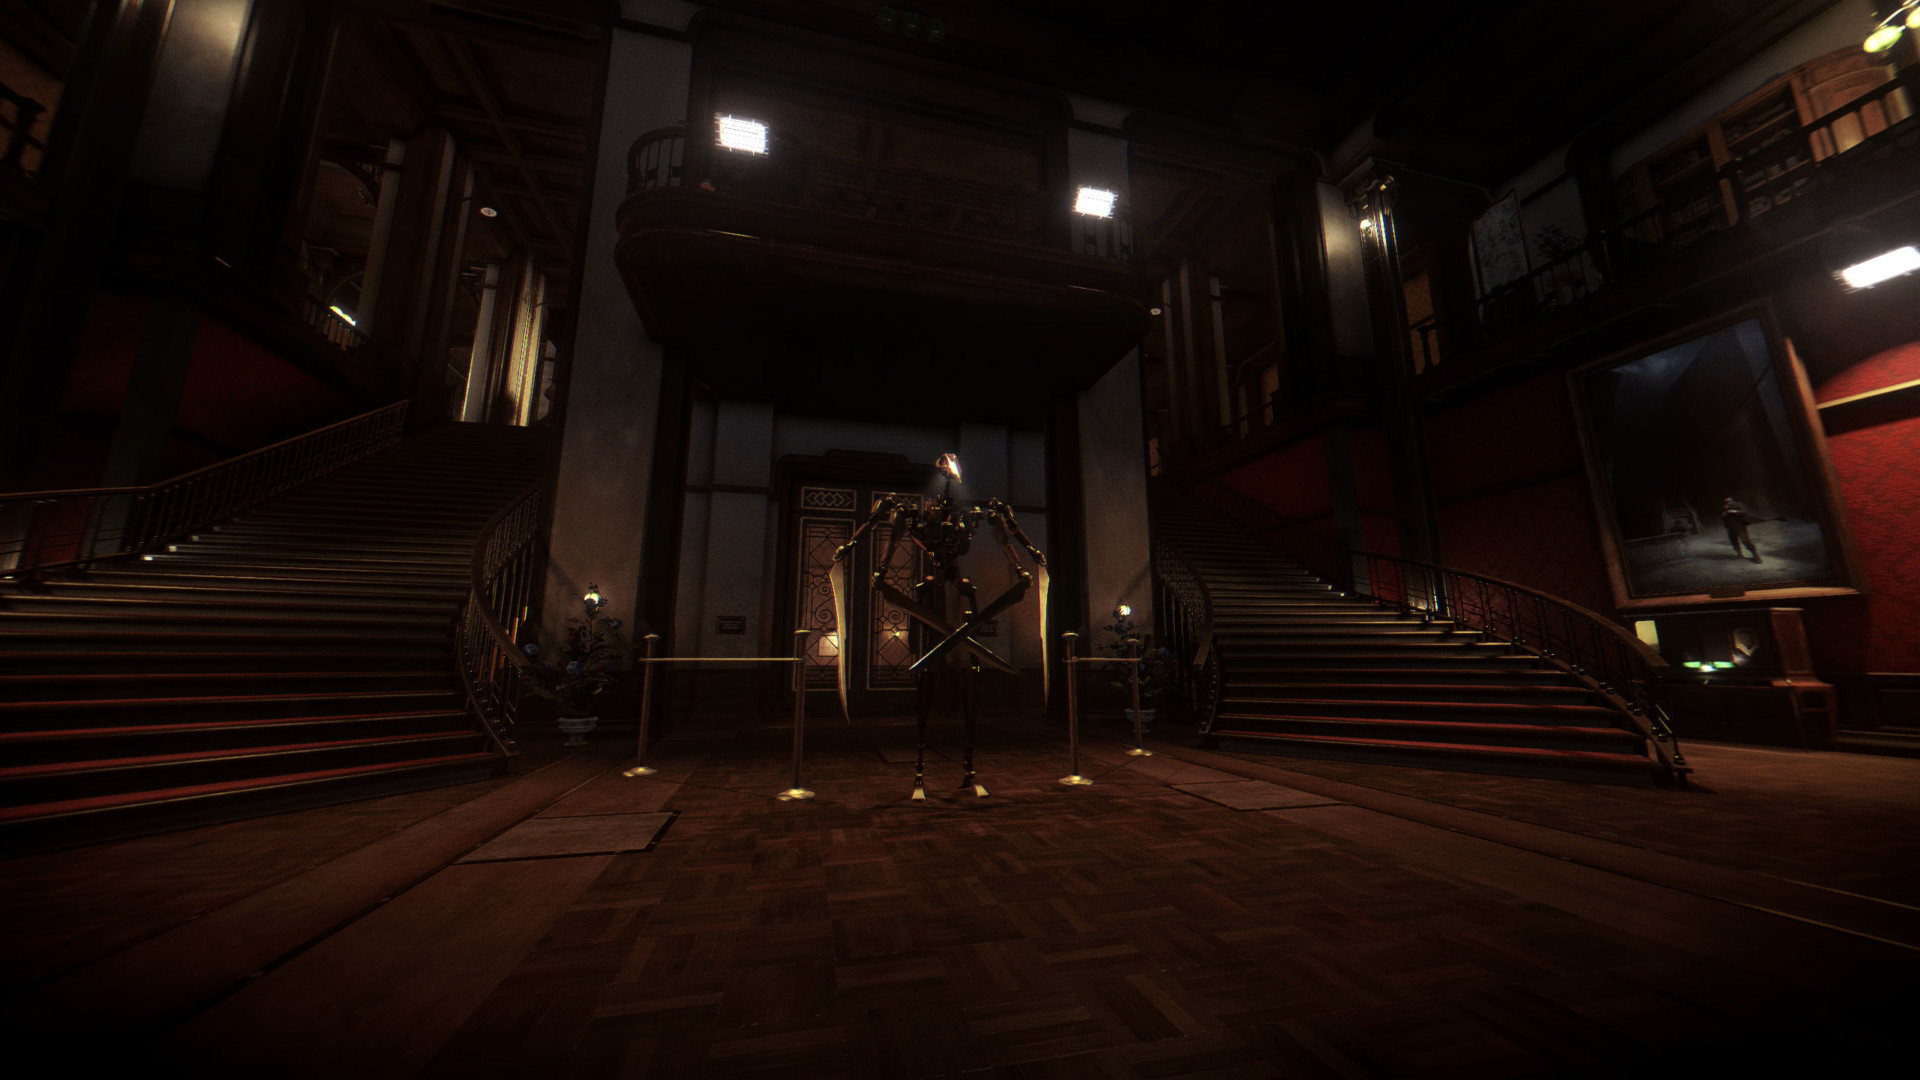 Let's Mod Dishonored 2 